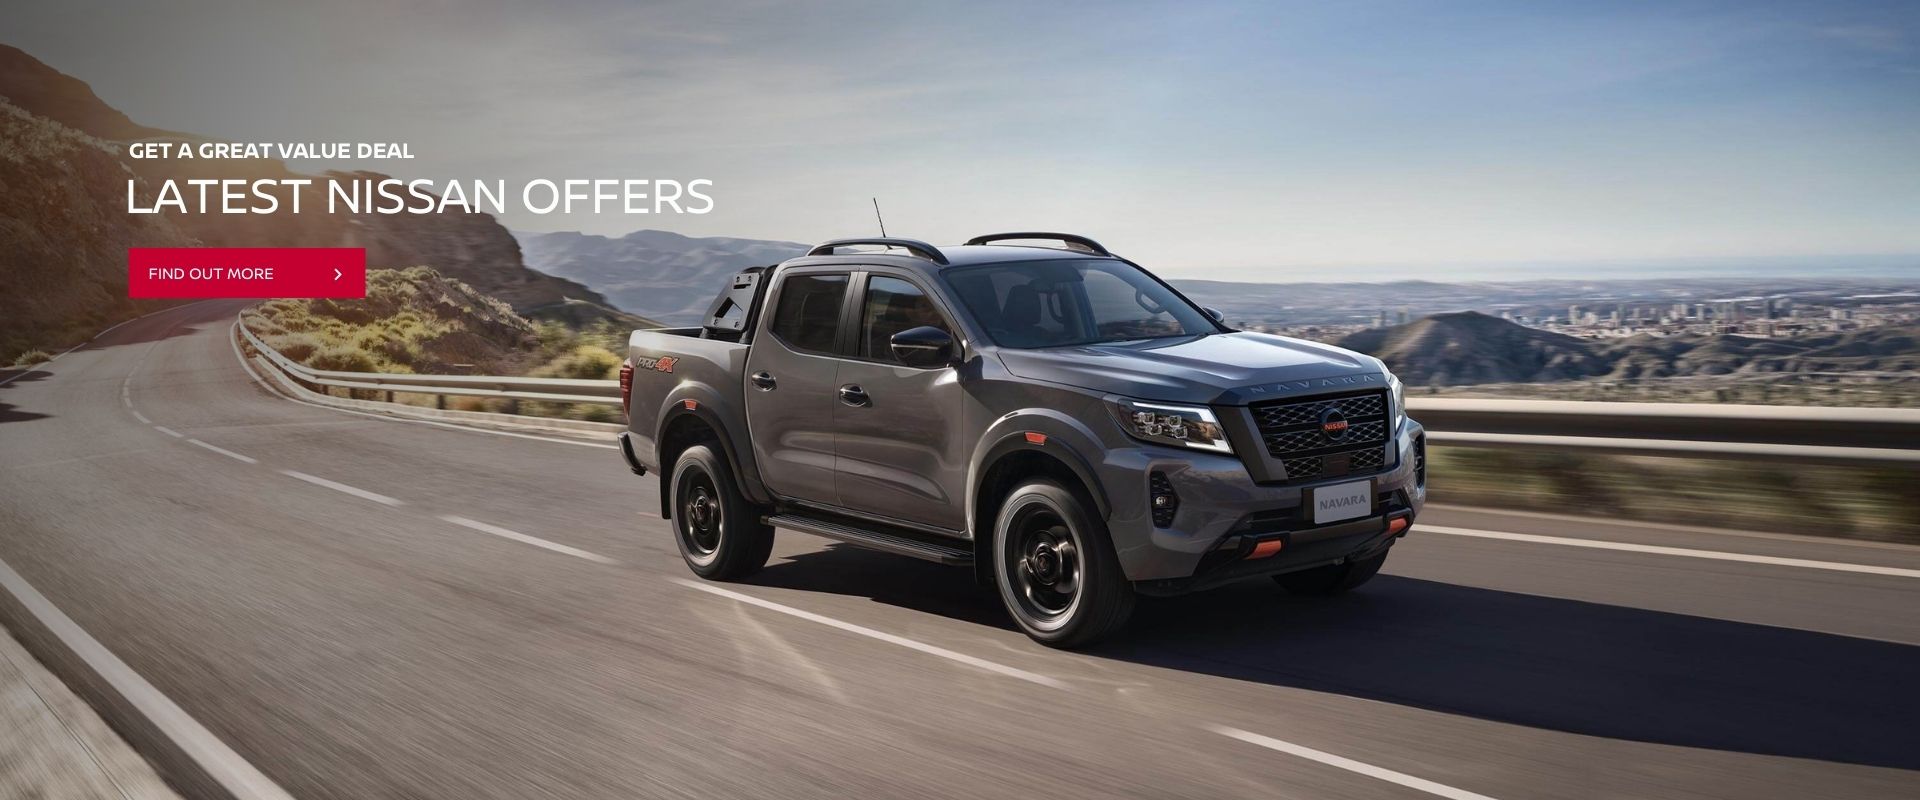 See Our Latest Nissan Offers